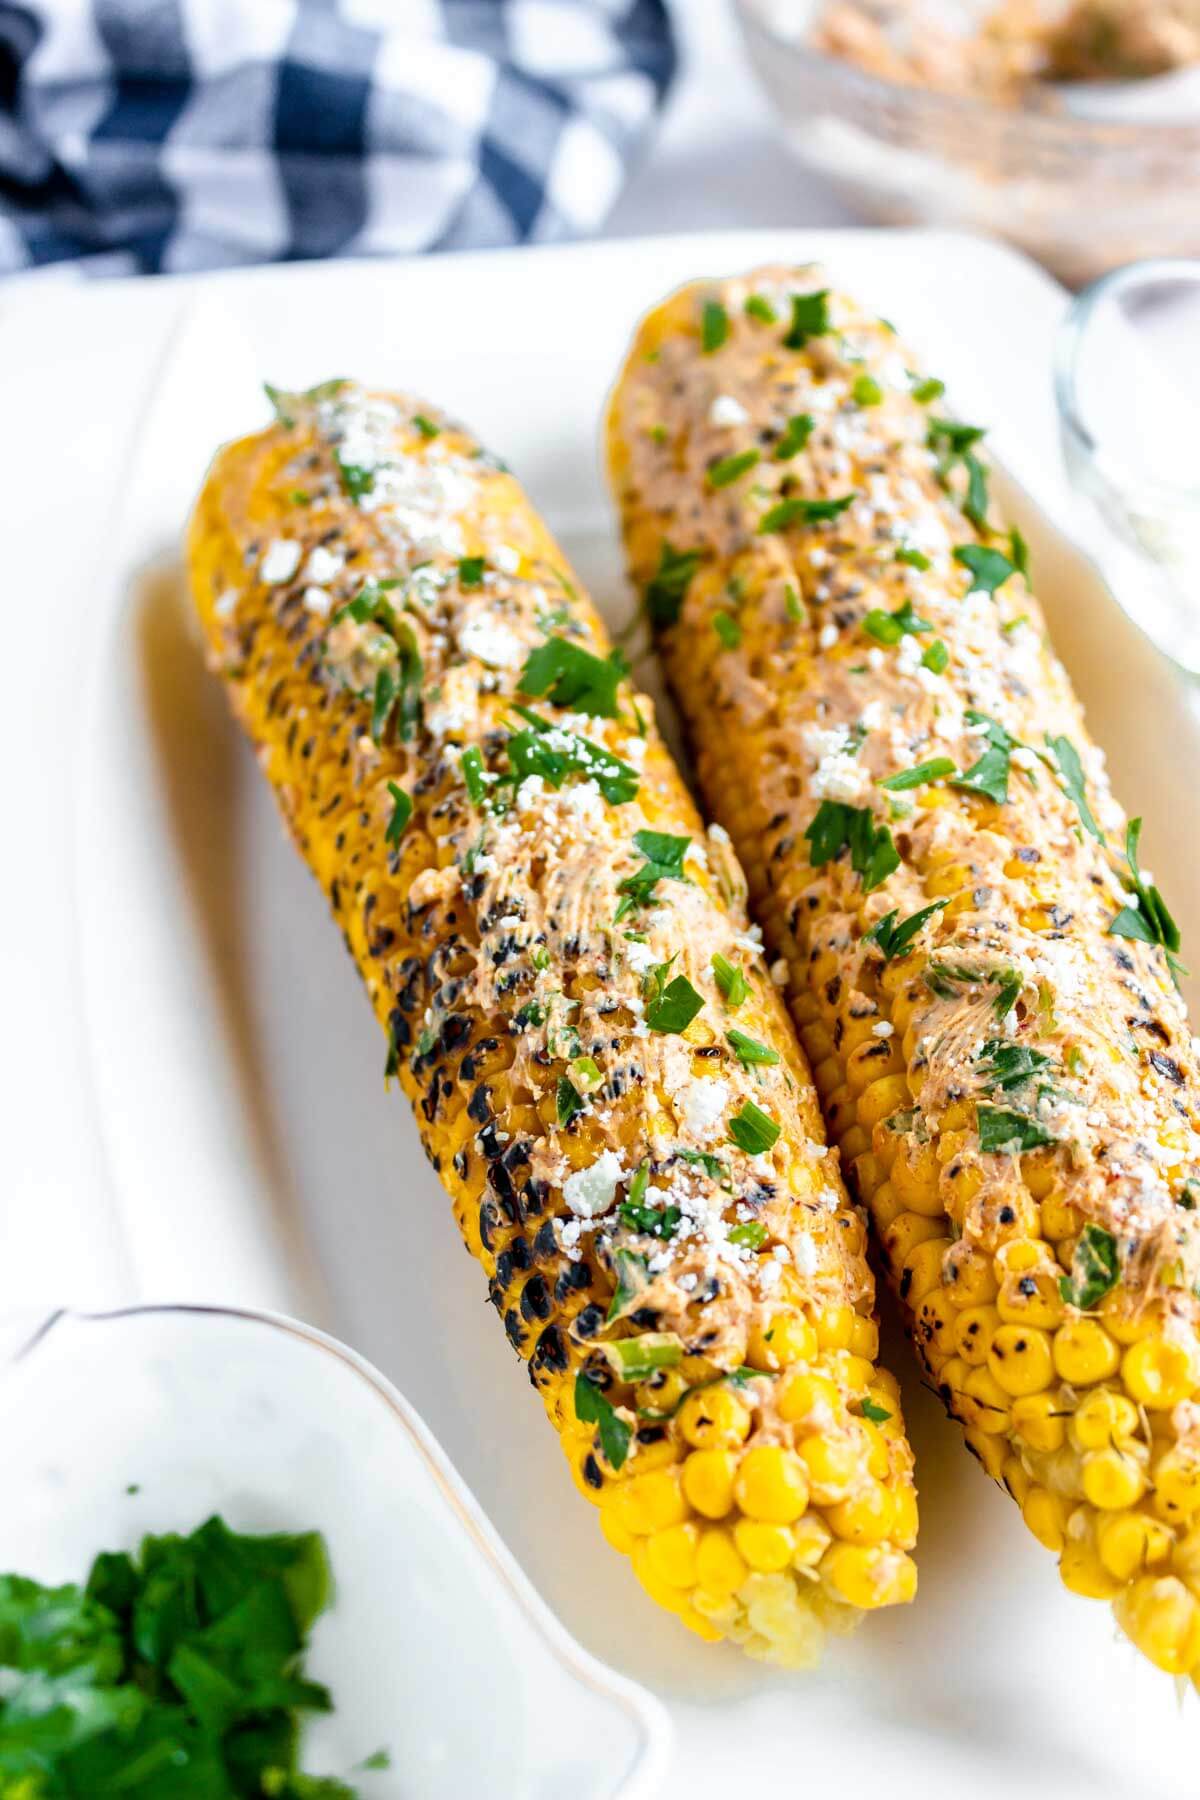 grilled corn on the cob with the sour cream and mayo topping.